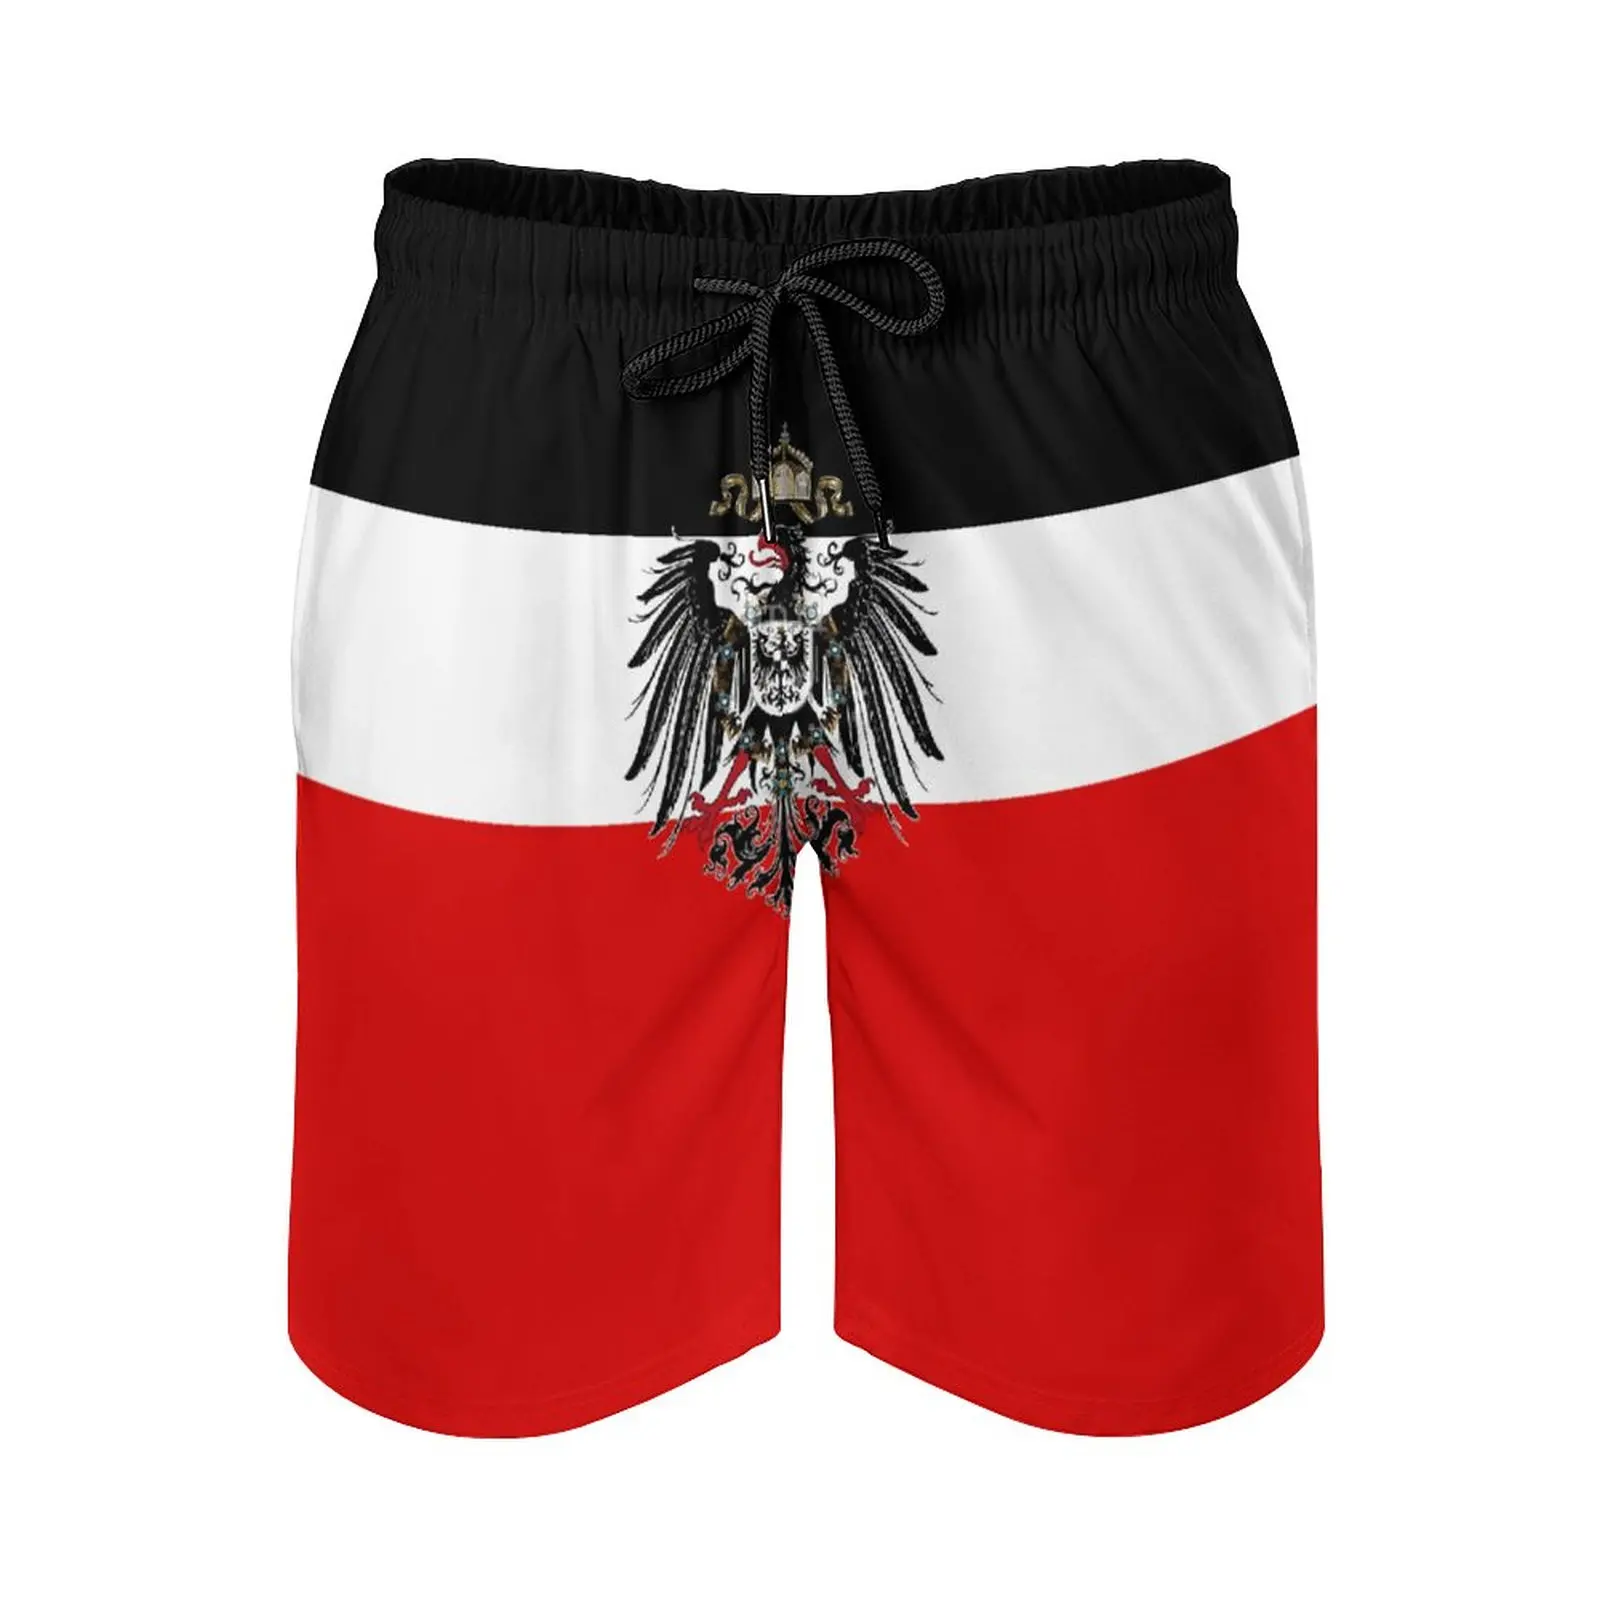 

Anime Men's Beach Shorts German Empires Loose Stretch Beach Creative Male Shorts Casual Adjustable Drawstring Breathable Quick D